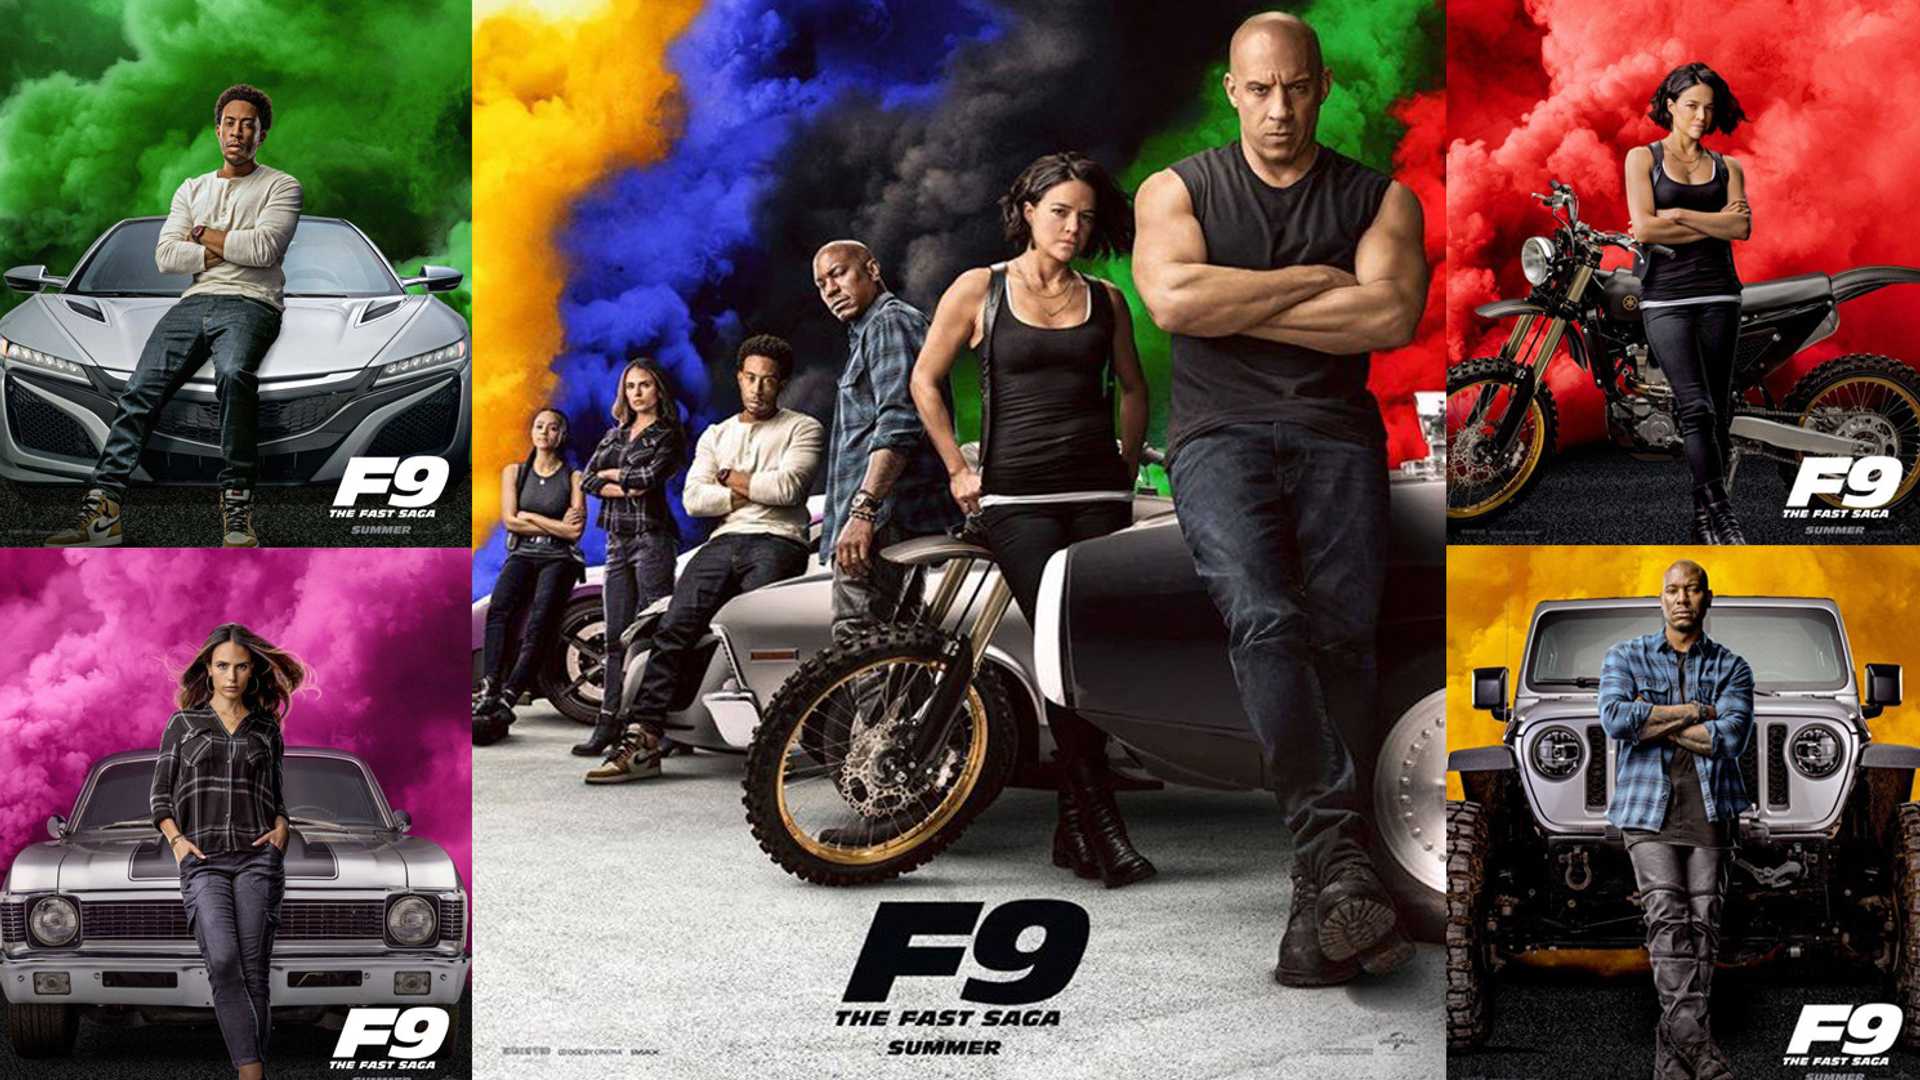 Fast 9 Poster Wallpapers